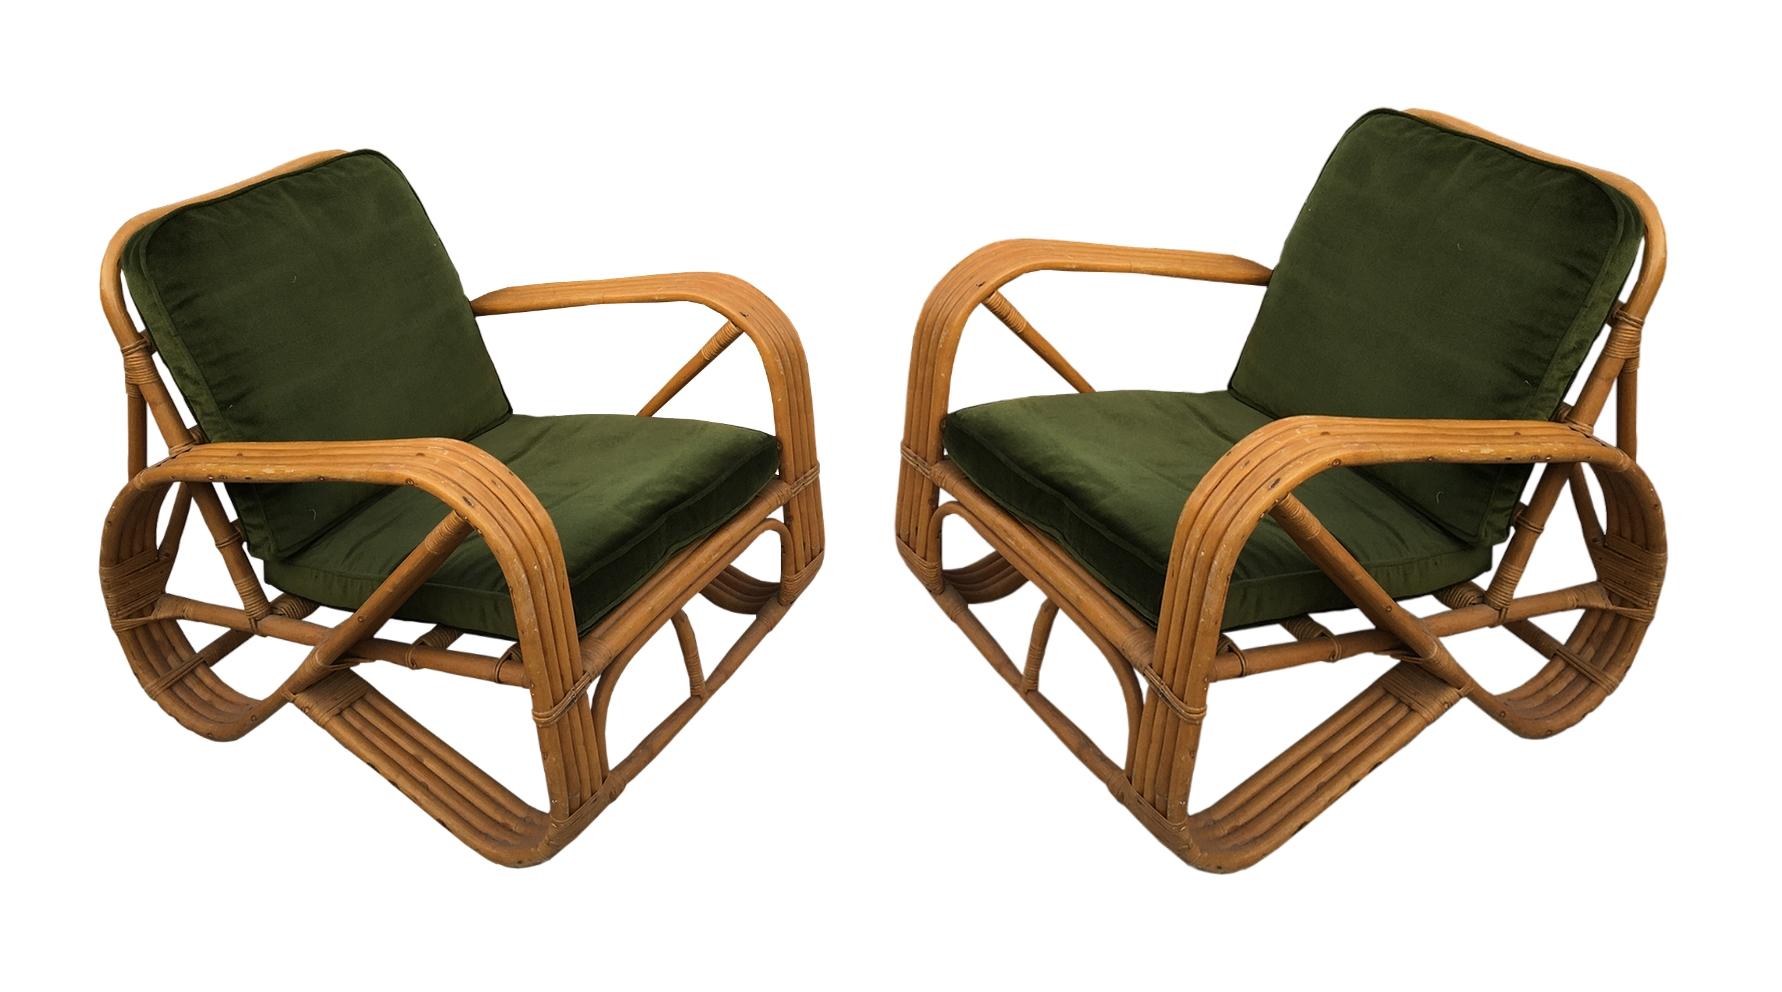 Living room set designed in the 1950s by the French designers Adrien Audoux and Frida Minnet (label on the back of an armchair) they are composed of a rattan structure, original cushions, seats and backs. In good original